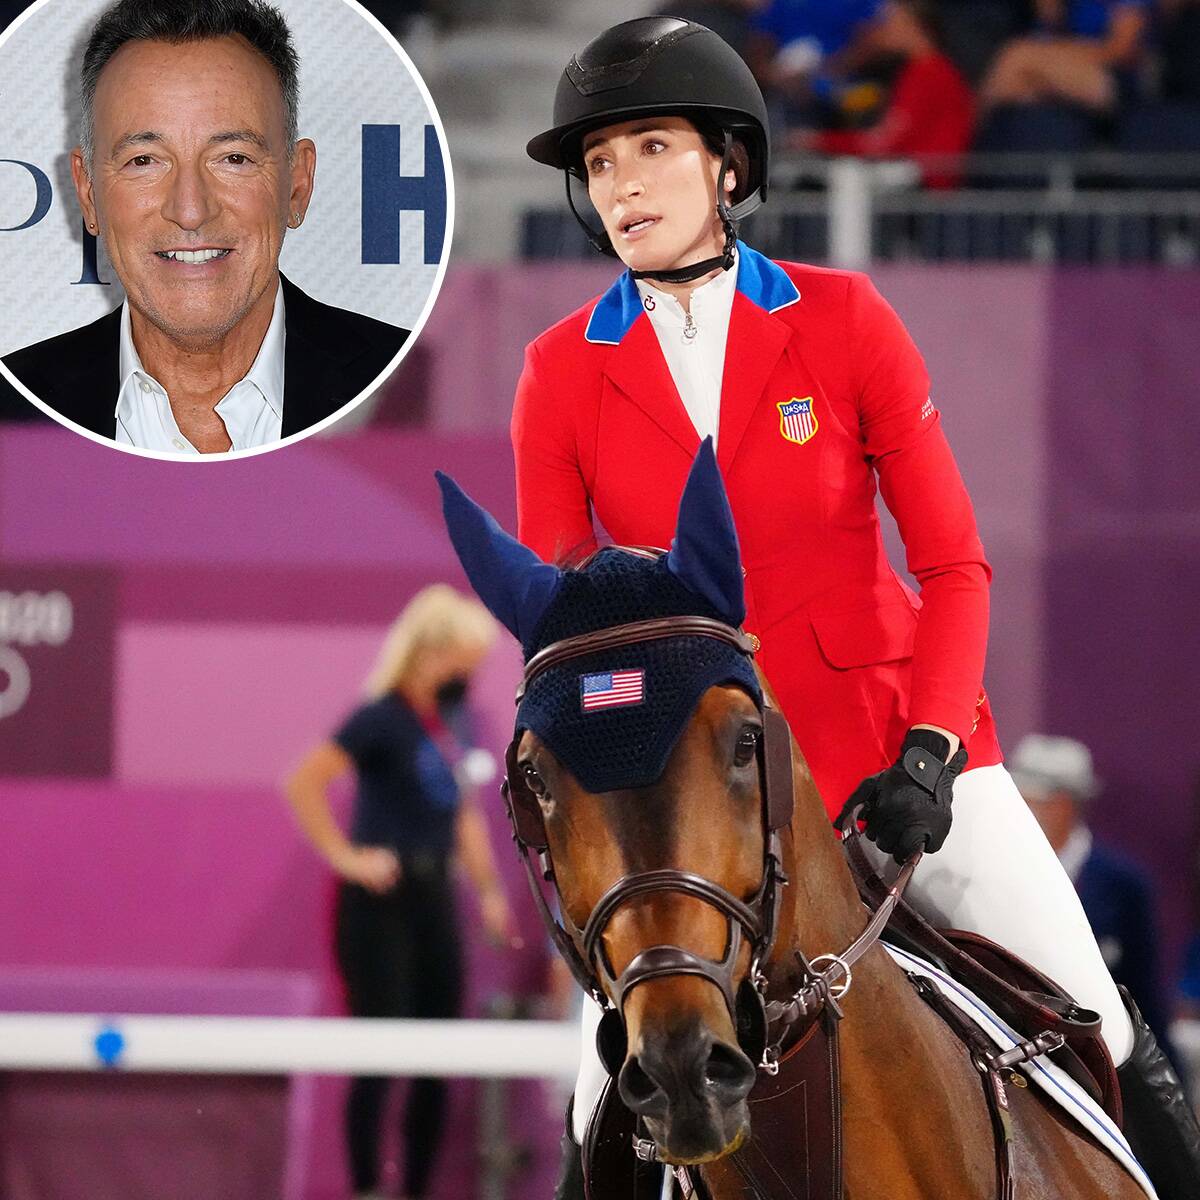 Bruce Springsteen's Daughter Jessica Springsteen Makes an Olympic Comeback and Wins Her First Medal